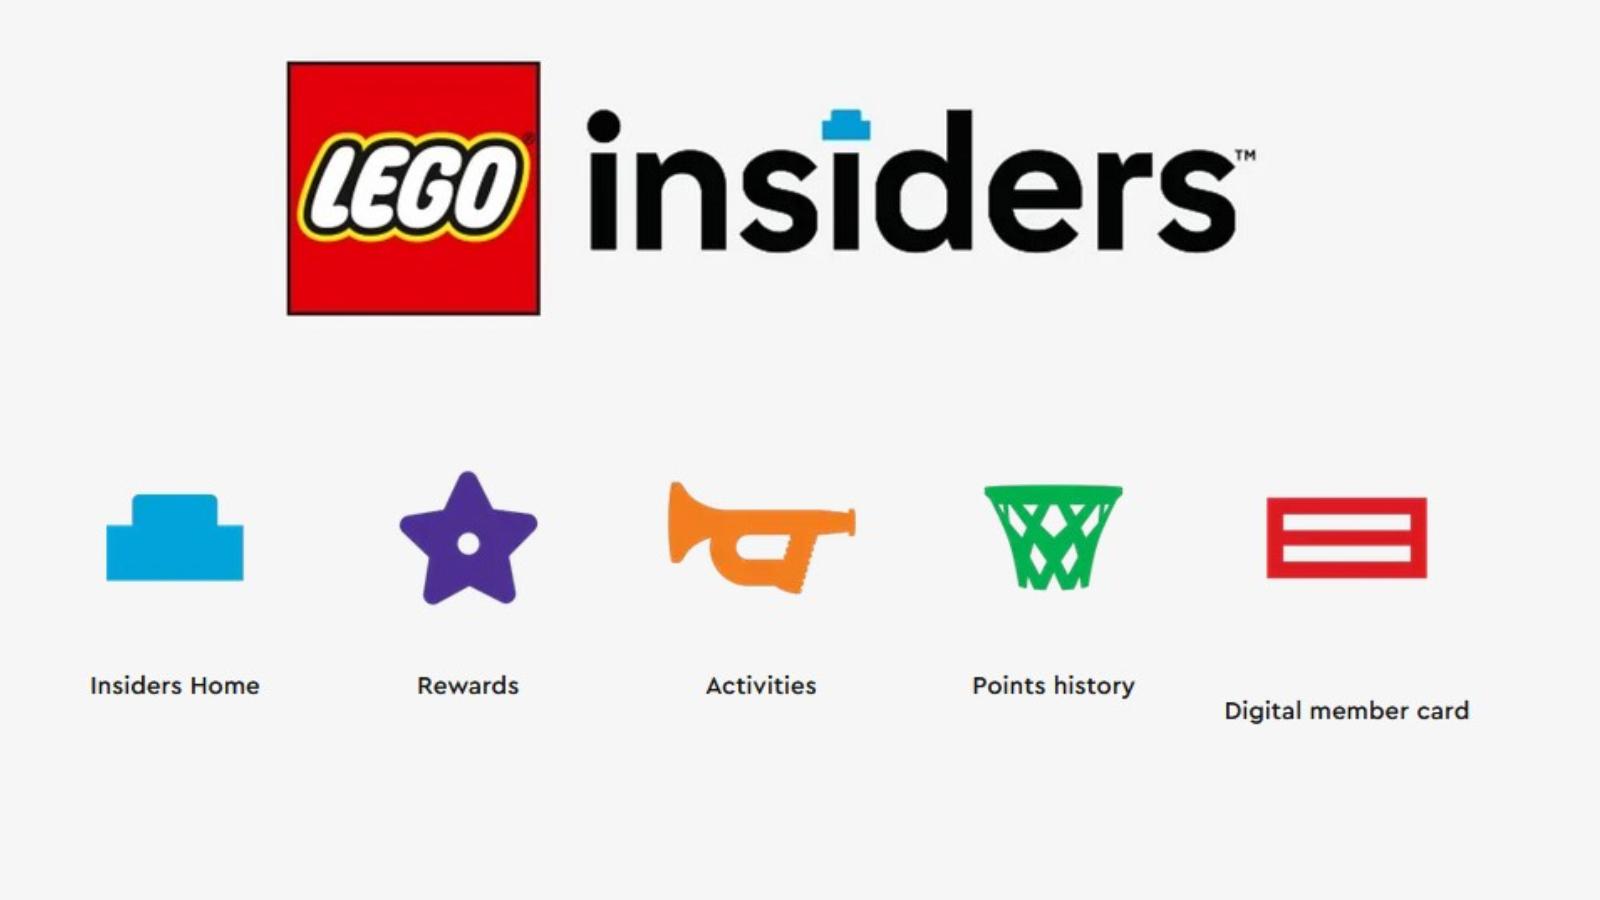 LEGO offering serious deals with LEGO Insiders weekend event - Dexerto